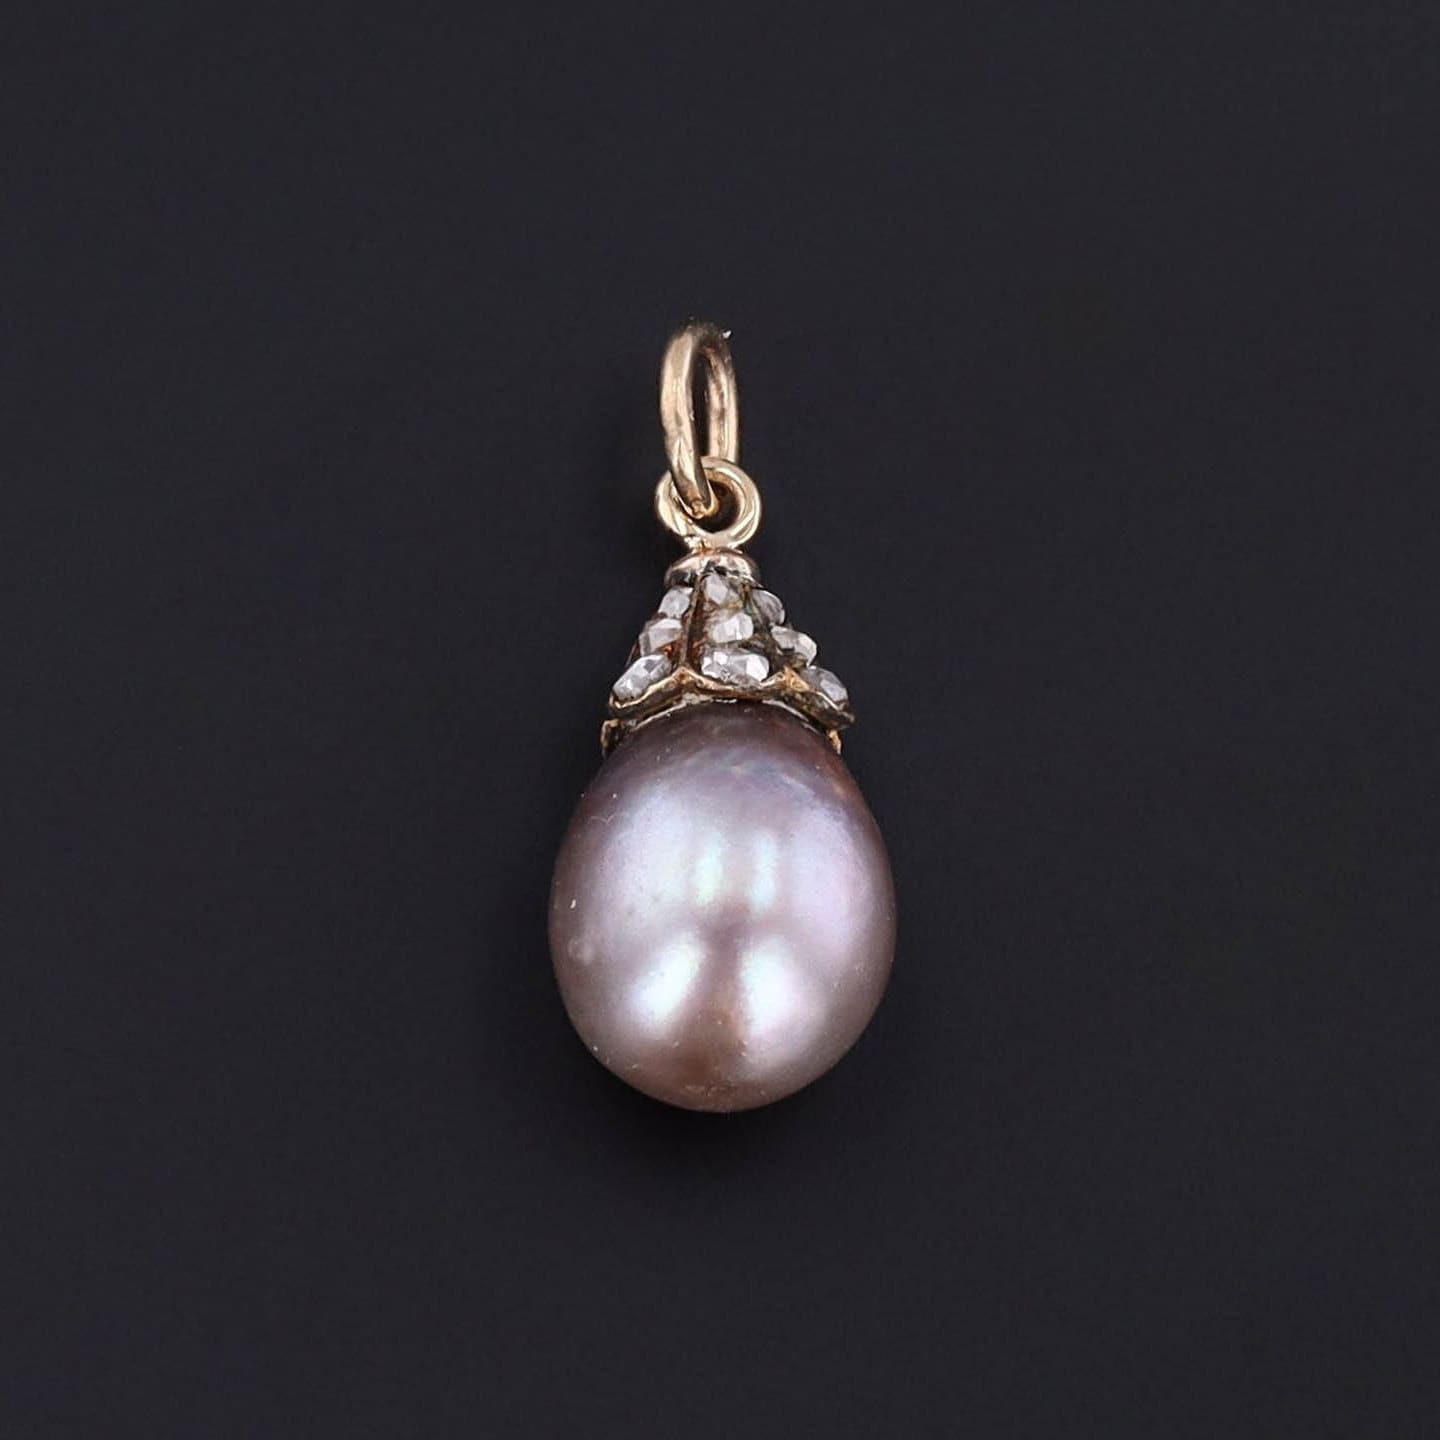 Antique Pearl and Diamond Conversion Charm of 14k Gold